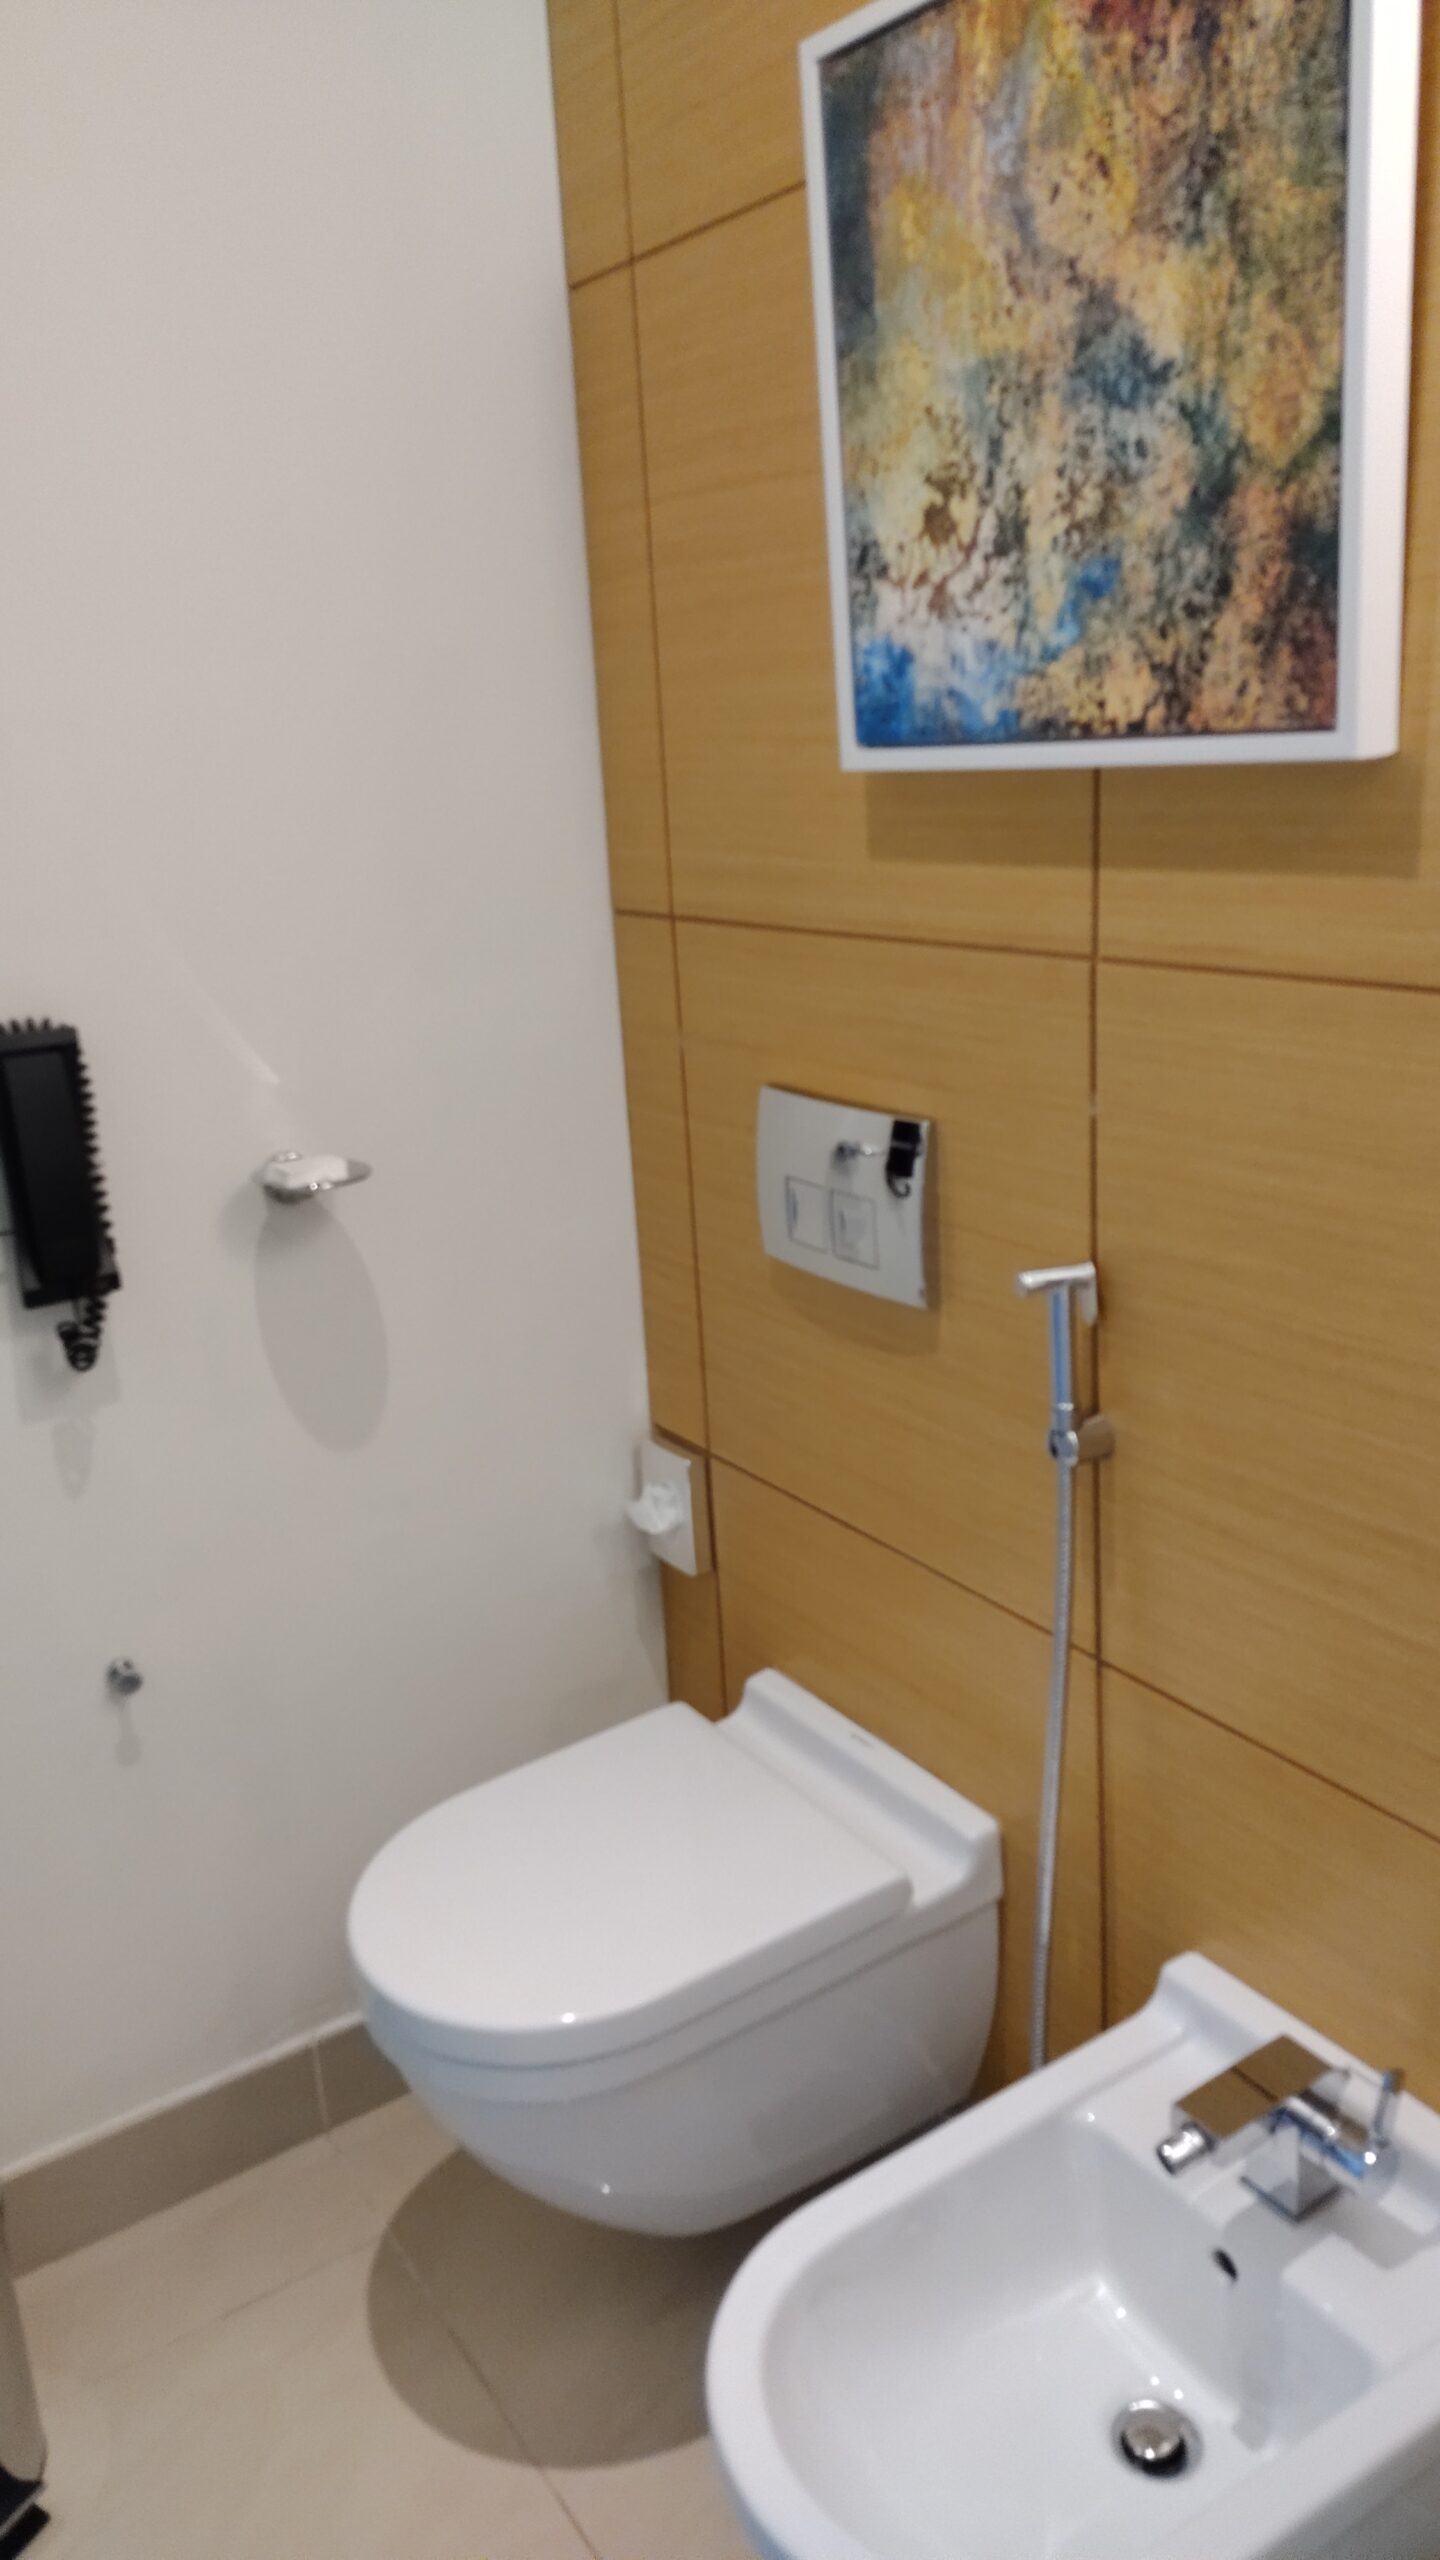 PICTURE OF THE TOILET AREA.